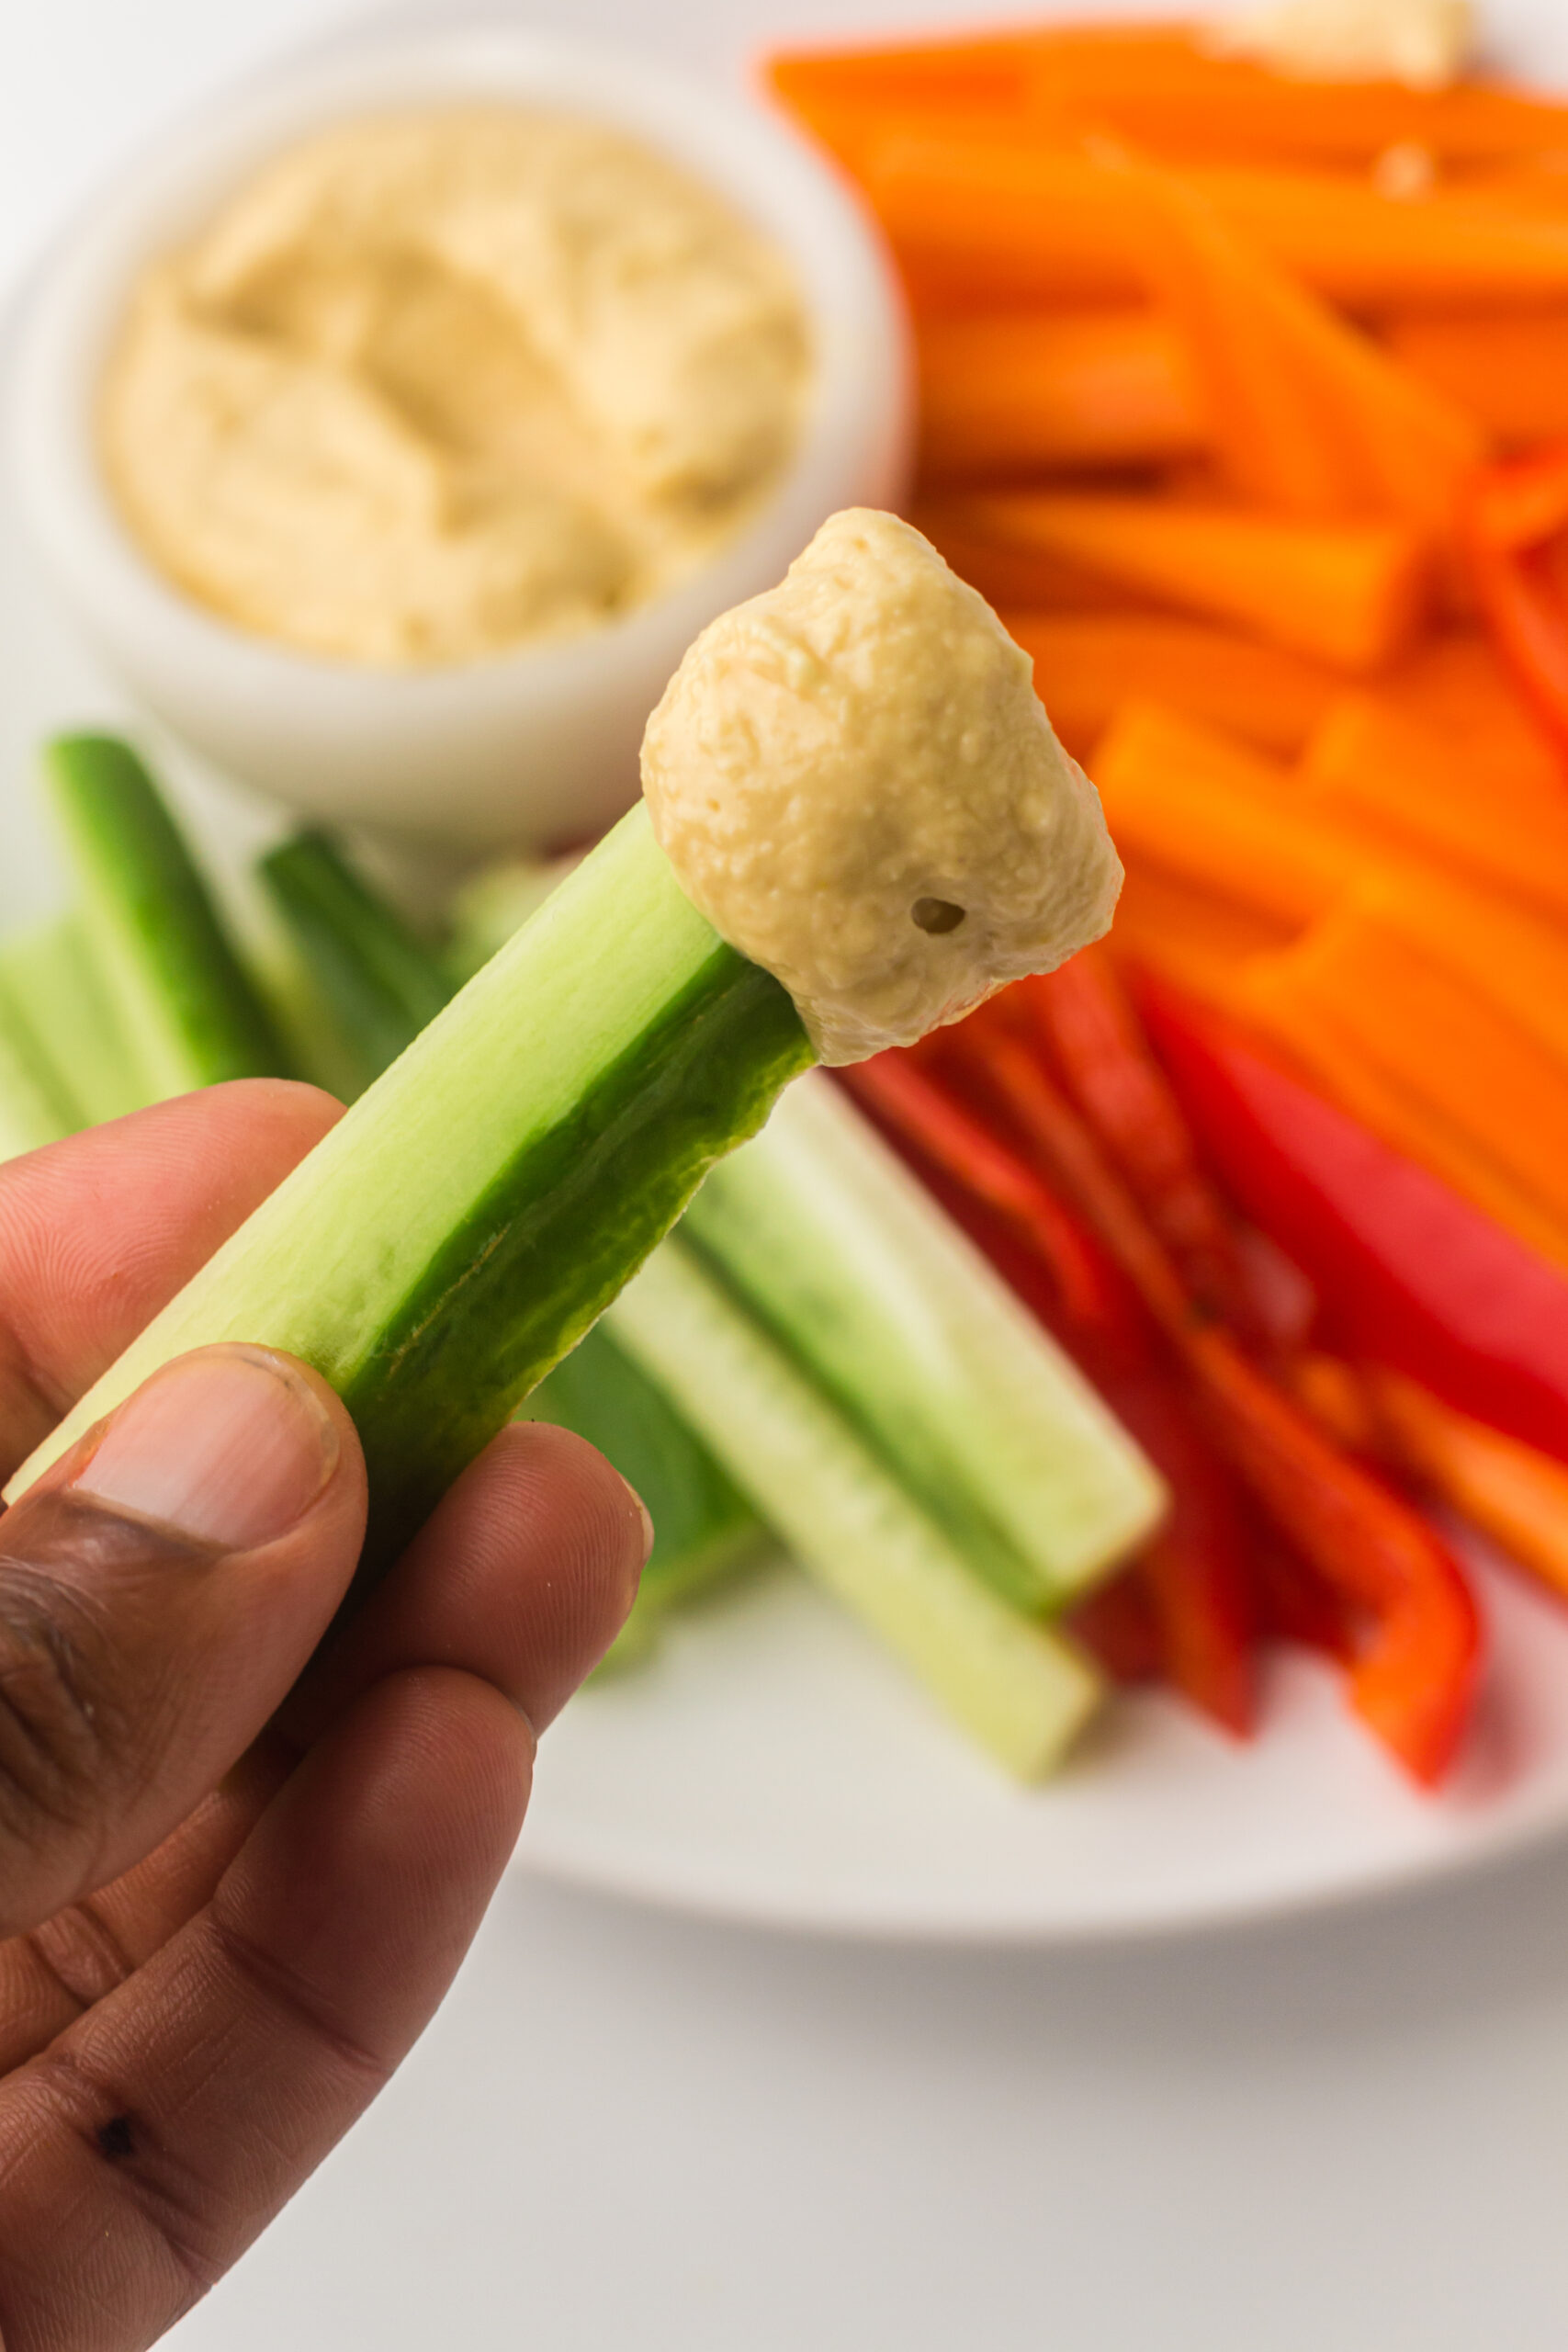 Crunchy Vegetable Sticks and Creamy Hummus Snack: A Healthy Delight for All Ages